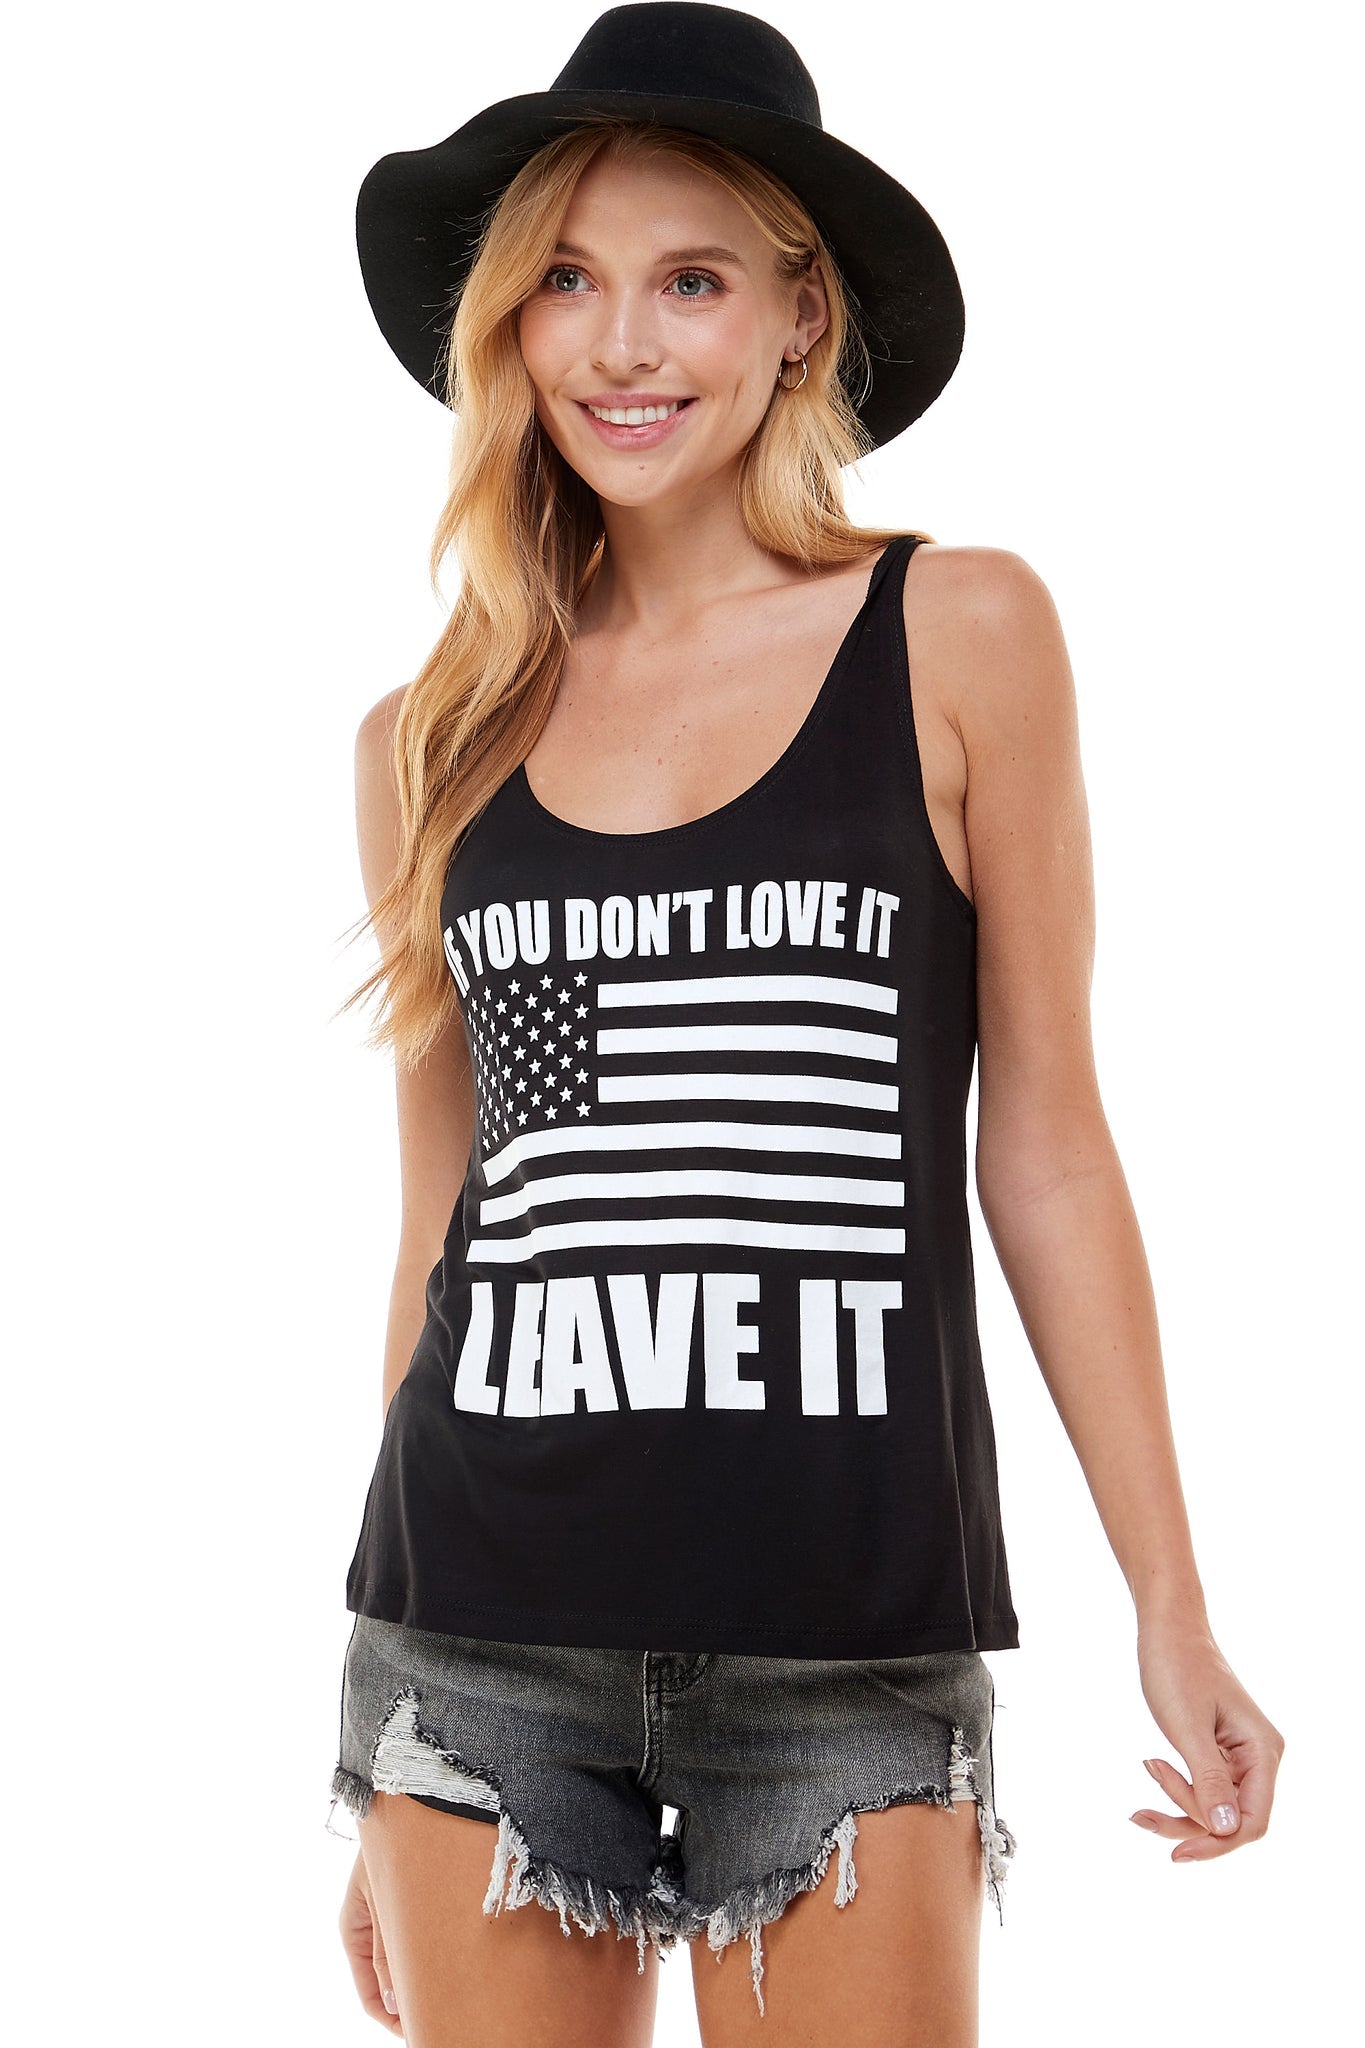 Love it or Leave it Tank - and, ATTITUDE, child, COUNTRY, countrystrong, COWGIRL, drinking, flag, GIRL, HOWDY, lips, love, moonshine, music, patriot, patriotic, peace, PLUS, rock, rocker, RODEO, roll, shine, SIZE, strong, SUMMER, TANK, TOP, WESTERN, wild - Shirts & Tops - Baha Ranch Western Wear